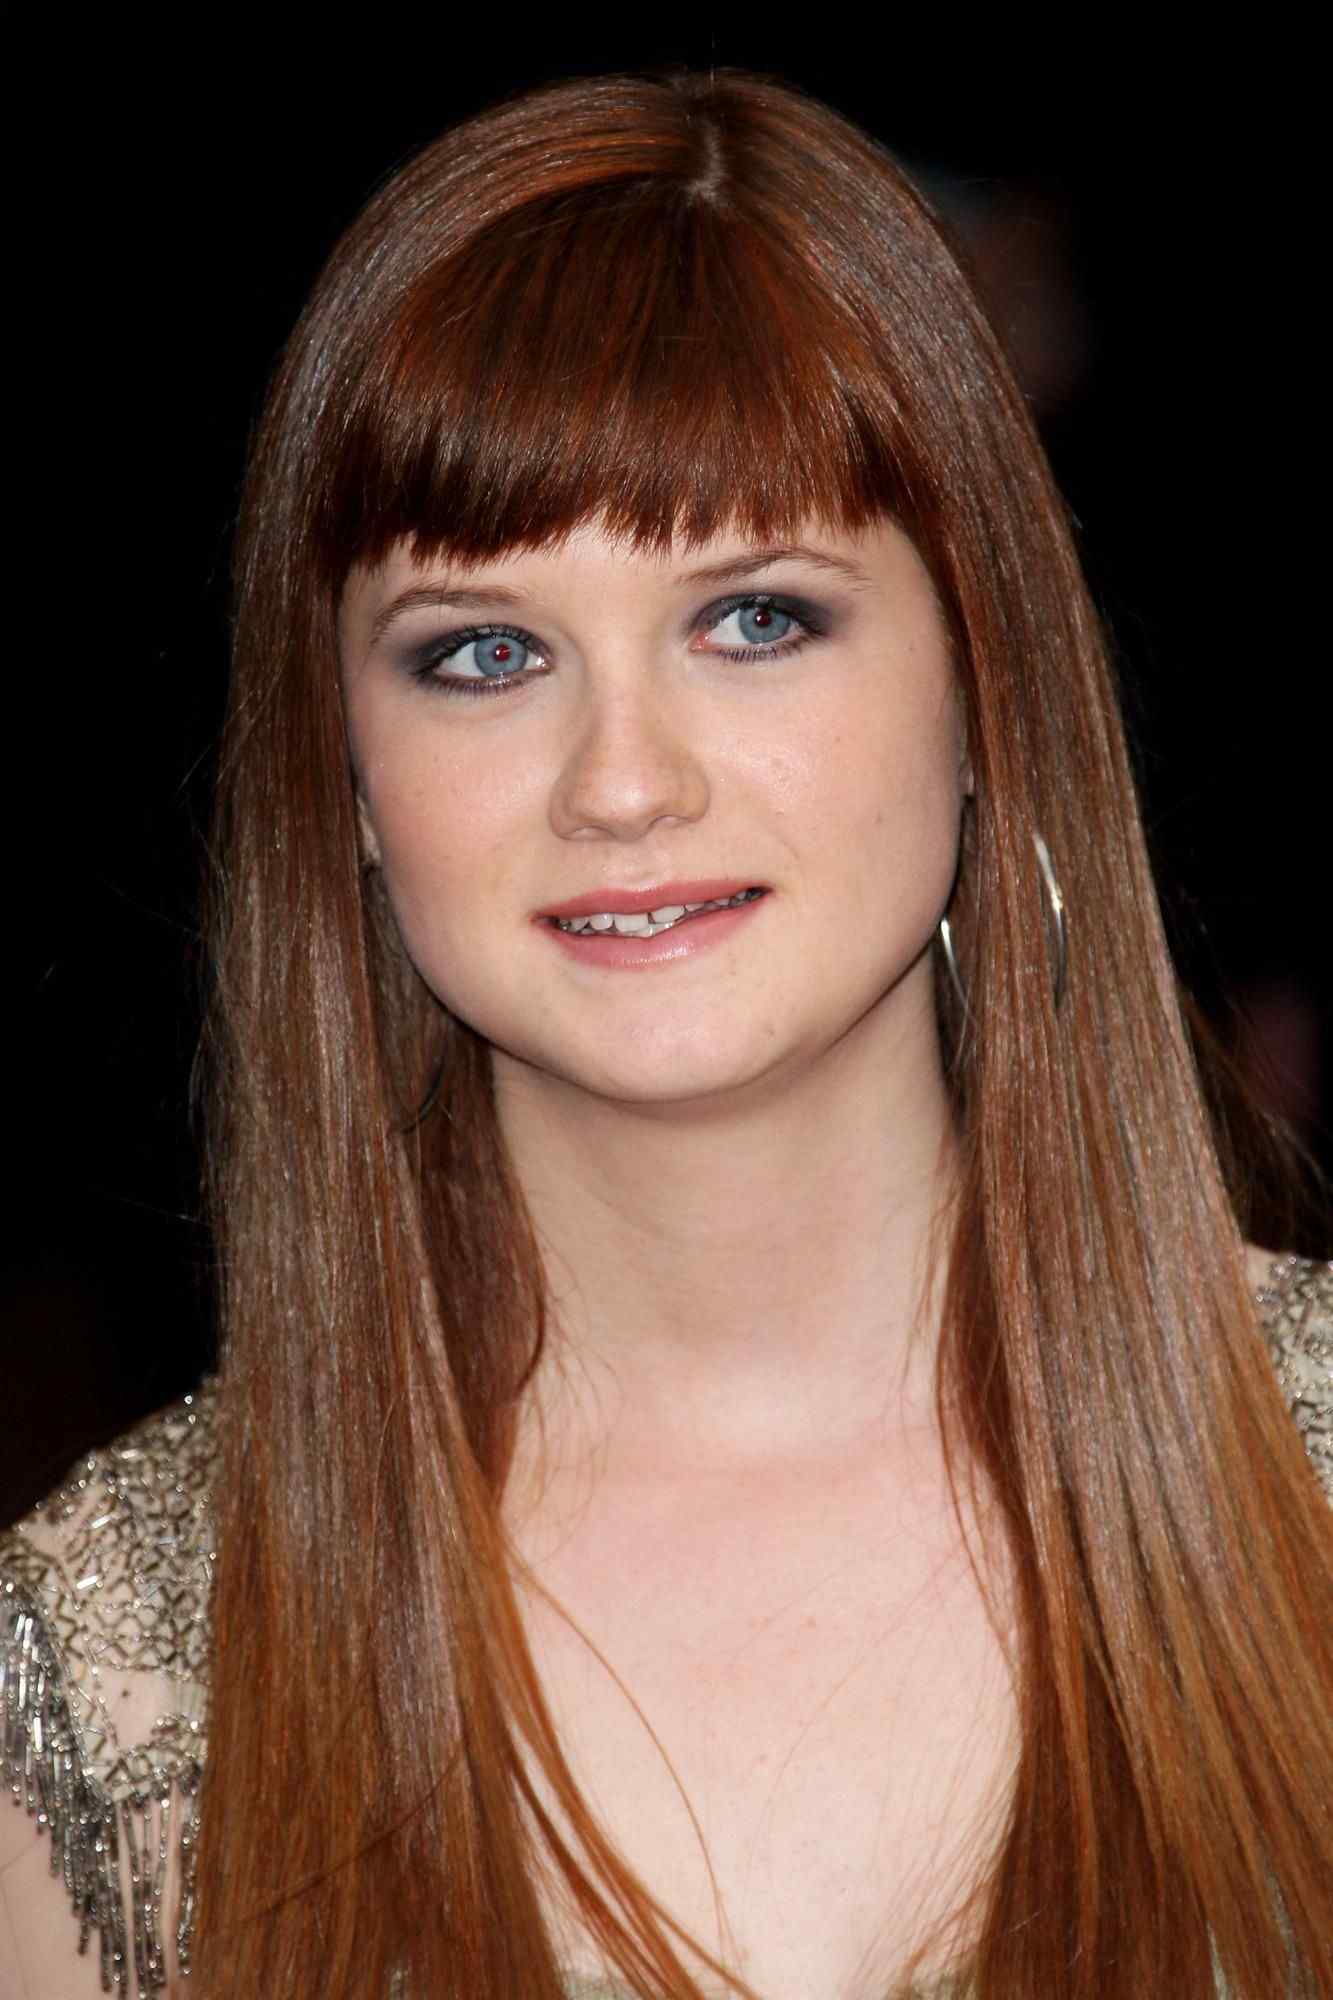 60+ Sexy Bonnie Wright Boobs Pictures Are Going To Make You Want Her Badly 7